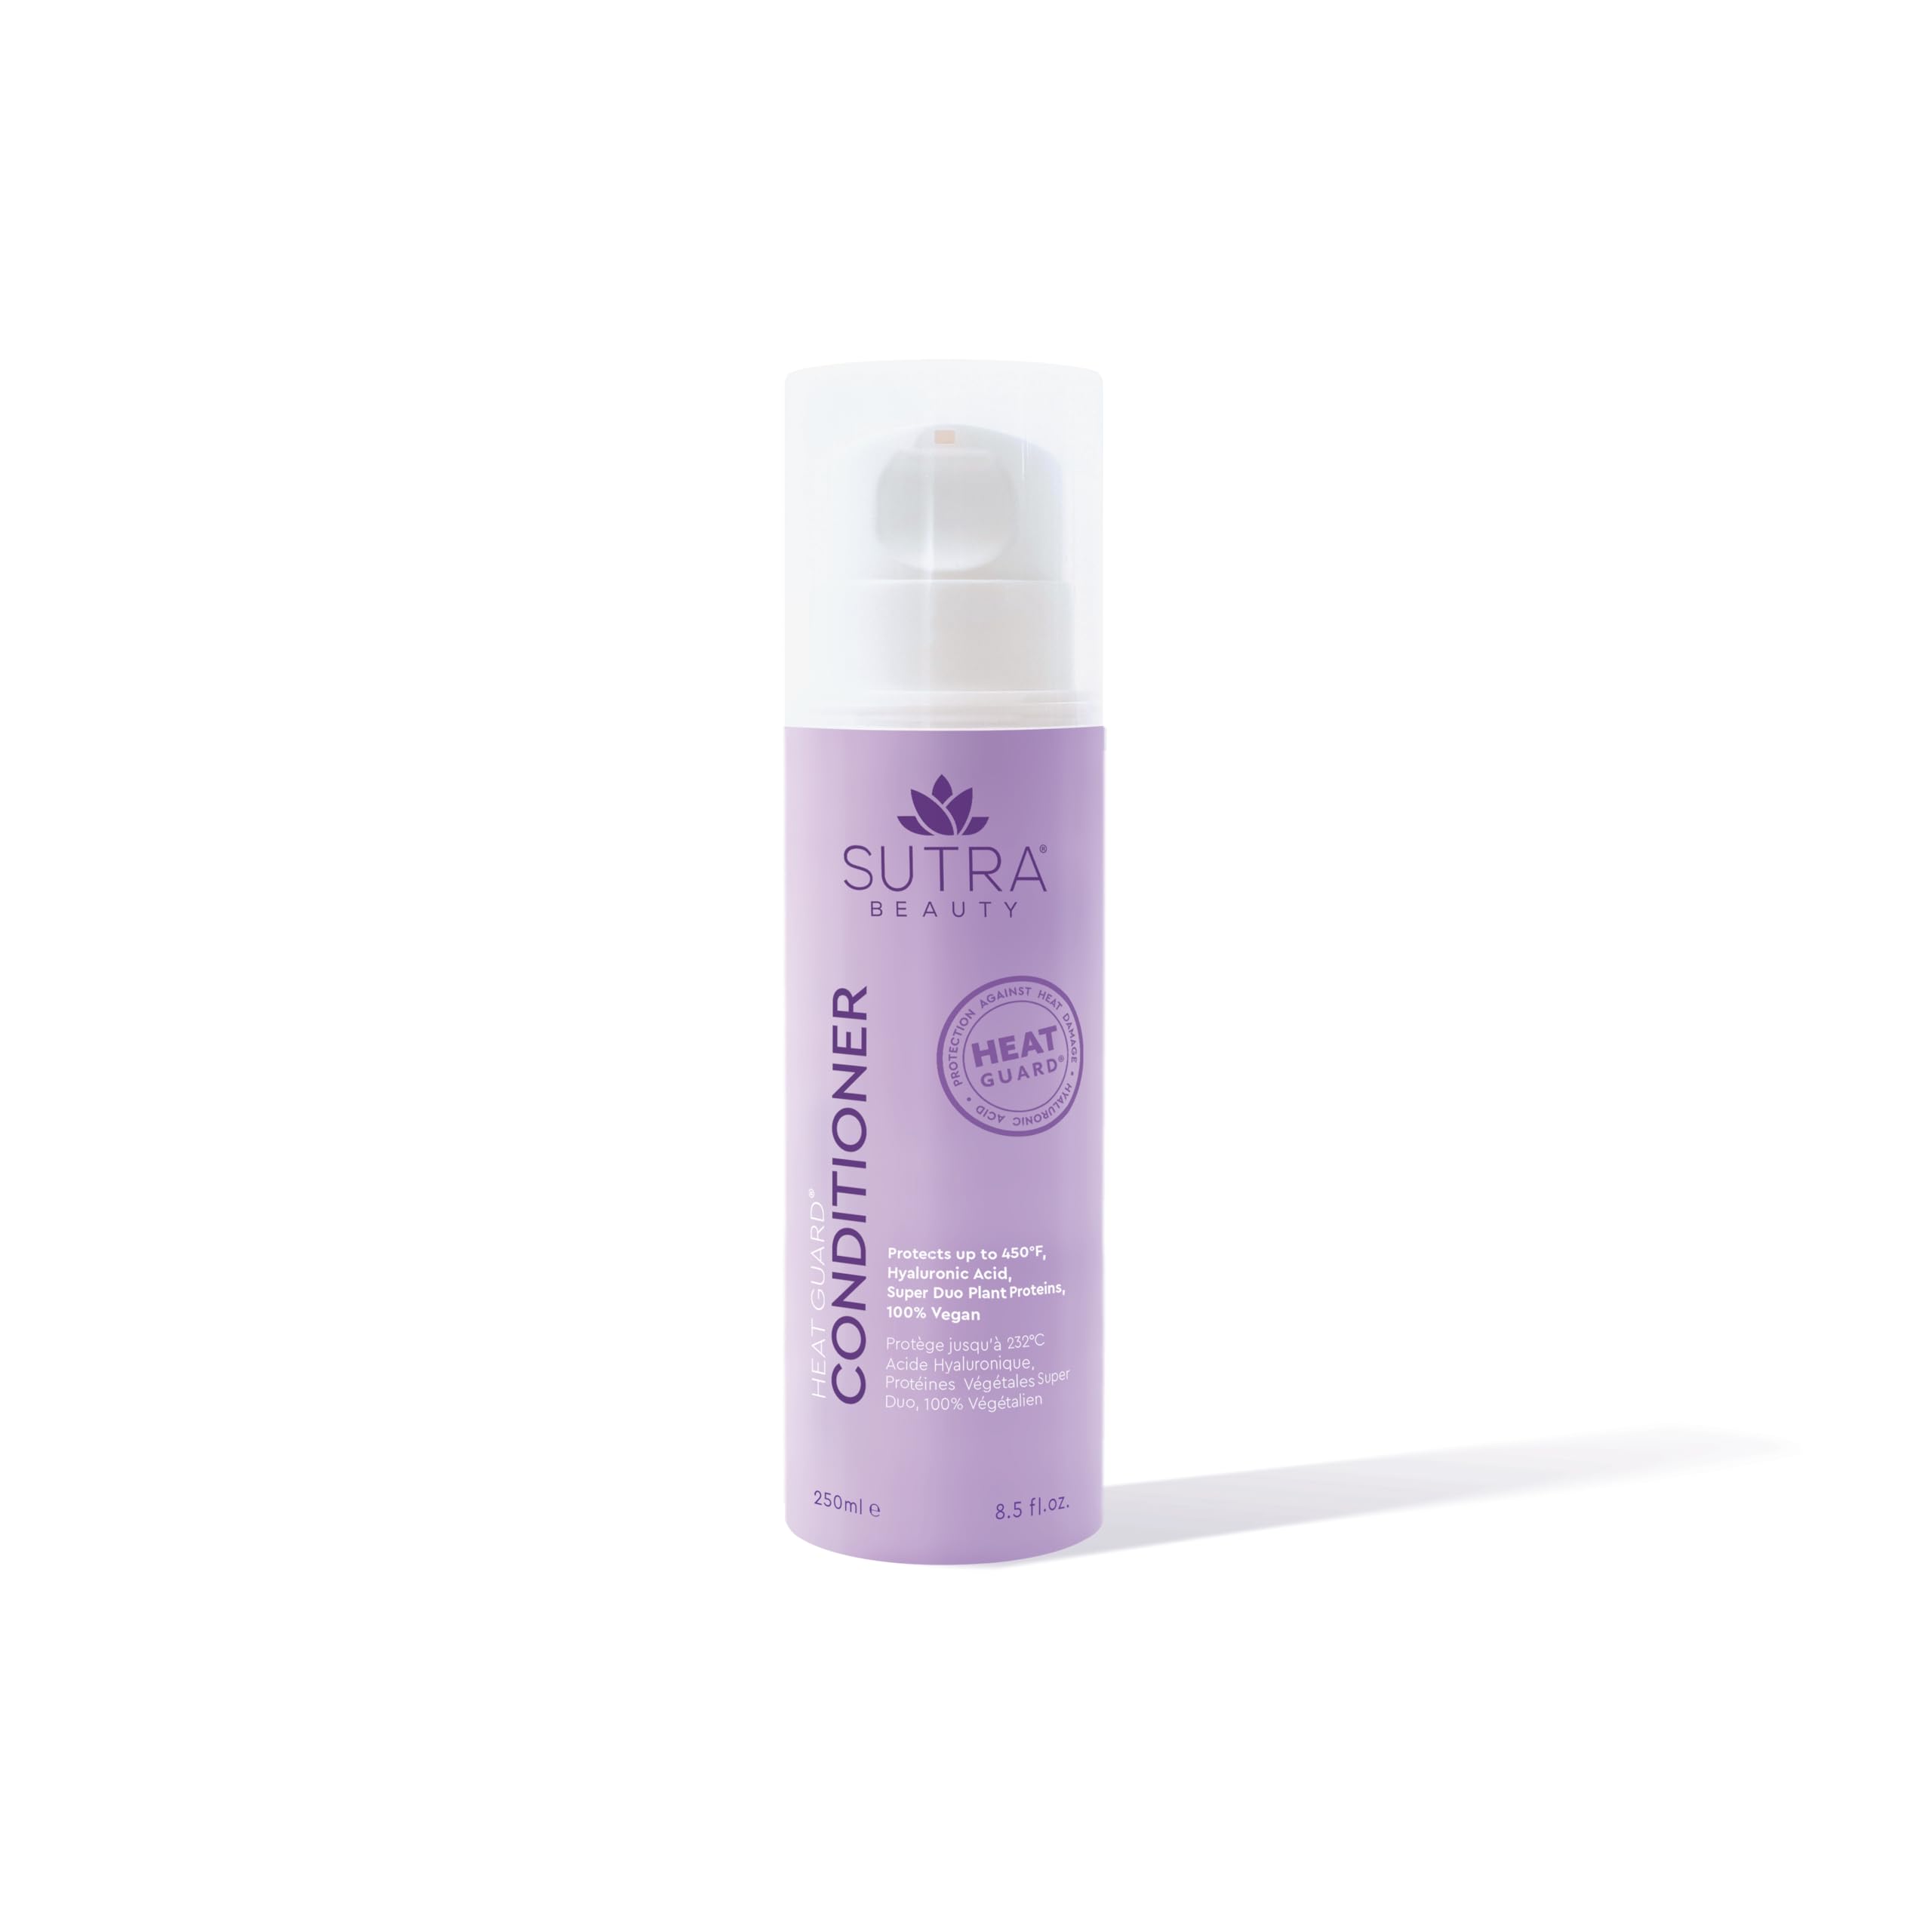 SUTRA Heat Guard® Conditioner - Hydrating, Detangling Power and Hyaluronic Acid Infusion for Ultimate Hair Protection, Moisture Restoration, and Effortless Styling